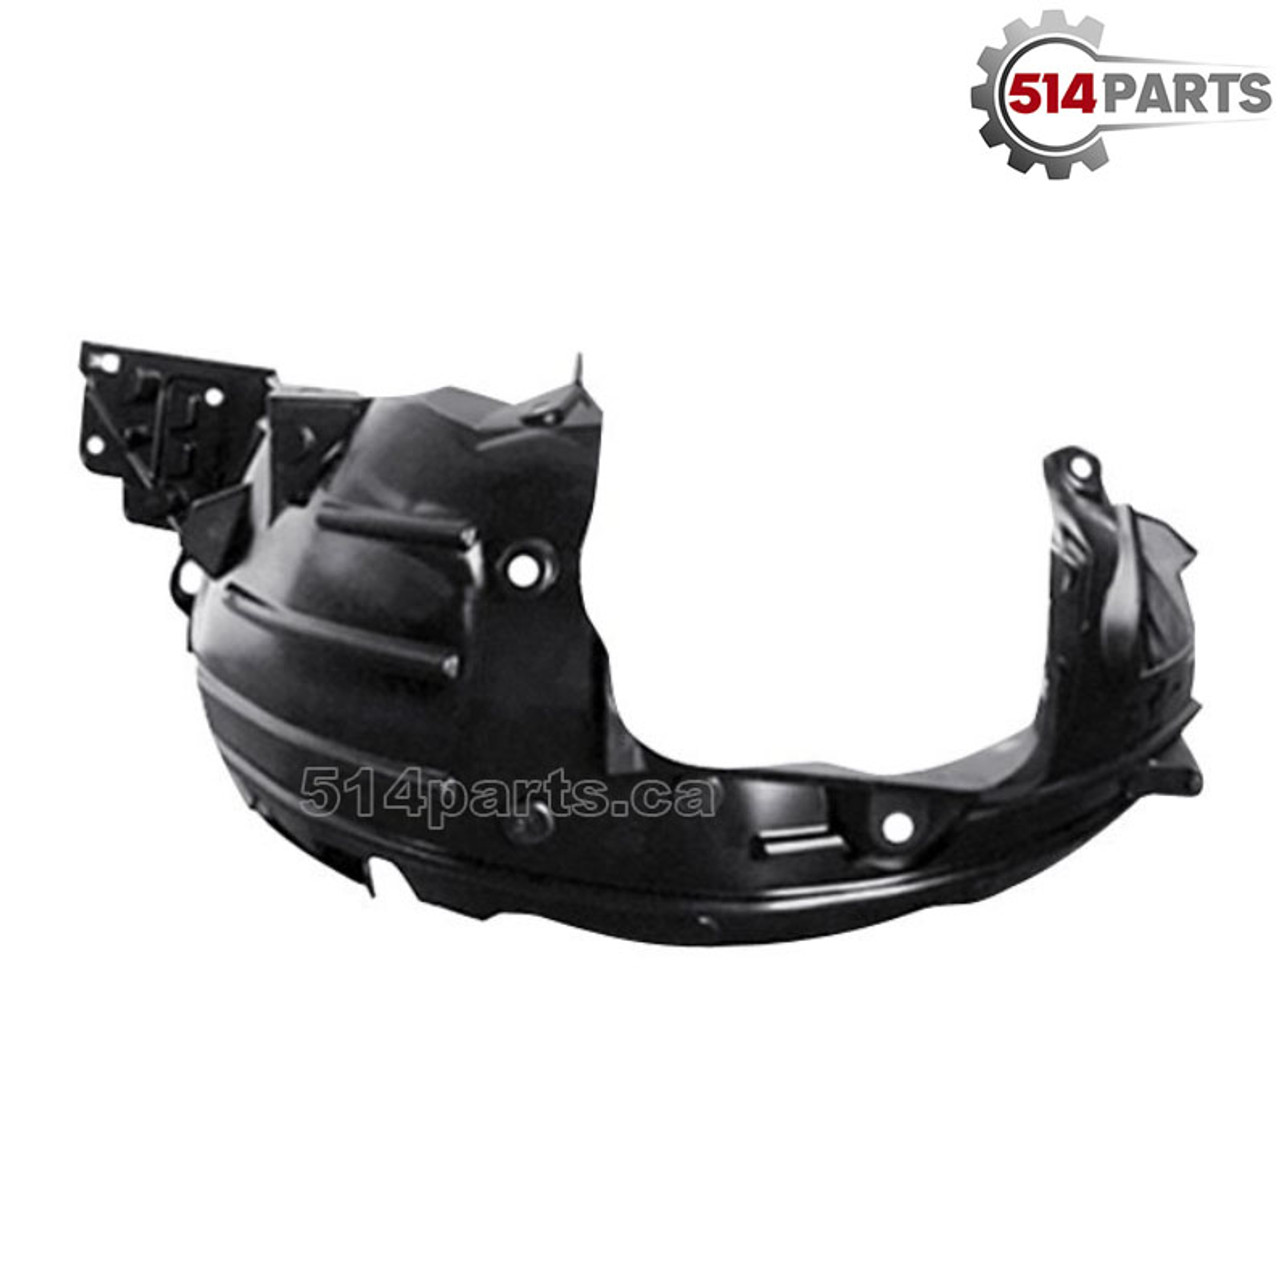 2015 - 2017 HONDA FIT FENDER LINER with BRACKET -  FAUSSE AILE avec SUPPORT